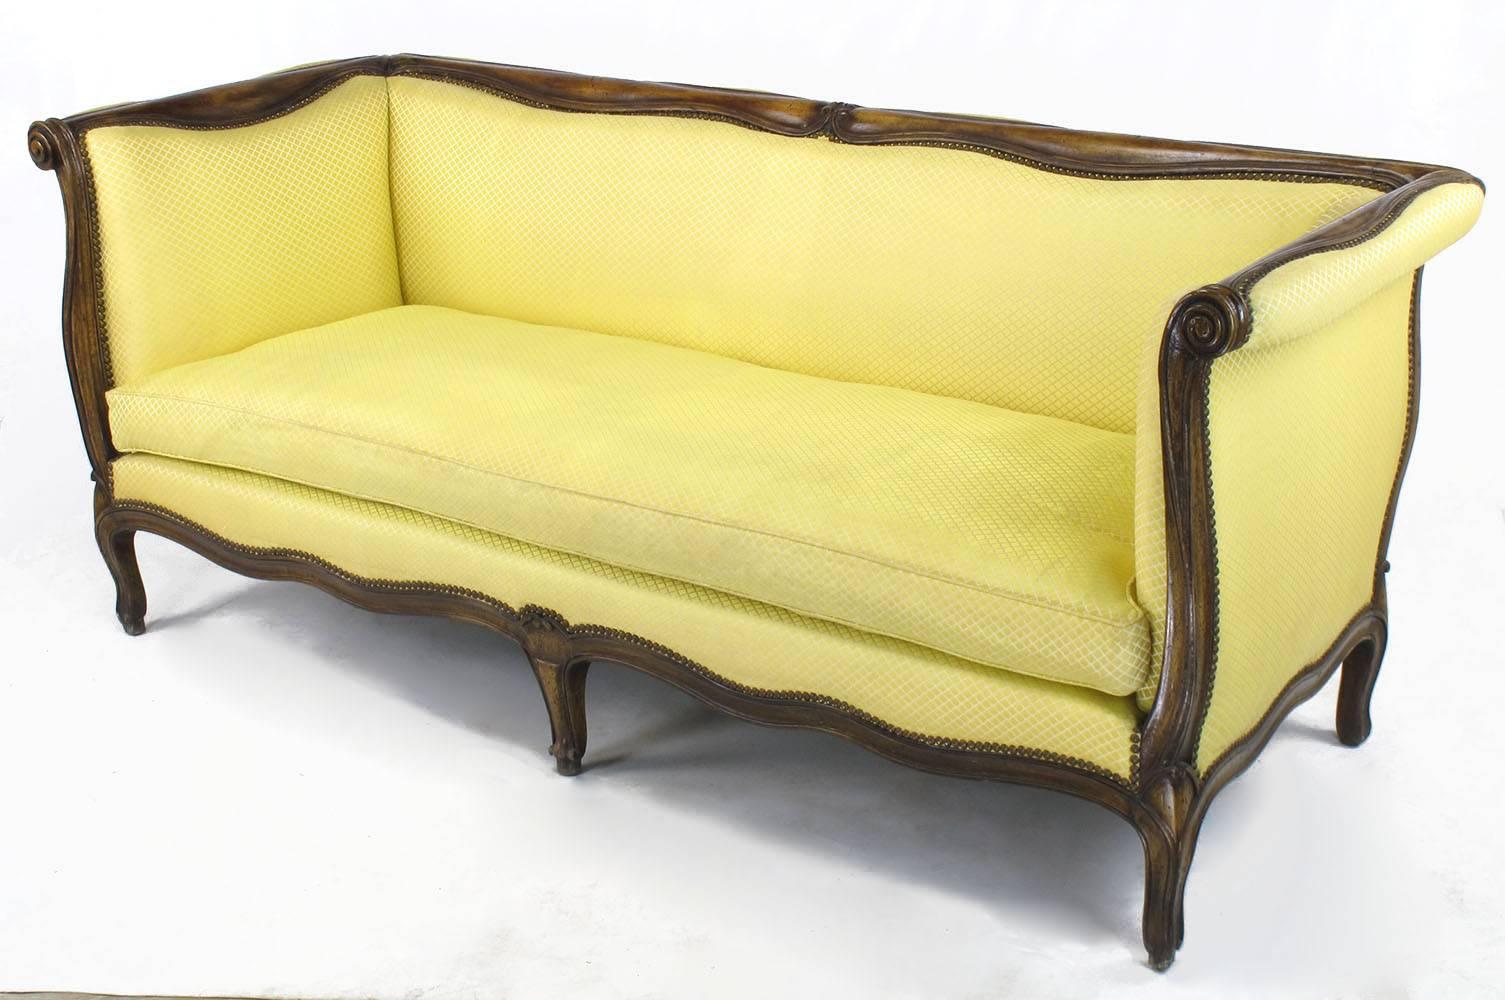 Yale Burge high quality reproduction Louis XV style even-arm canape. Hand-carved beech frame, distressed and stained walnut with a single seat down filled cushion. Upholstered in a yellow cross hatch silk that is in good condition with the only